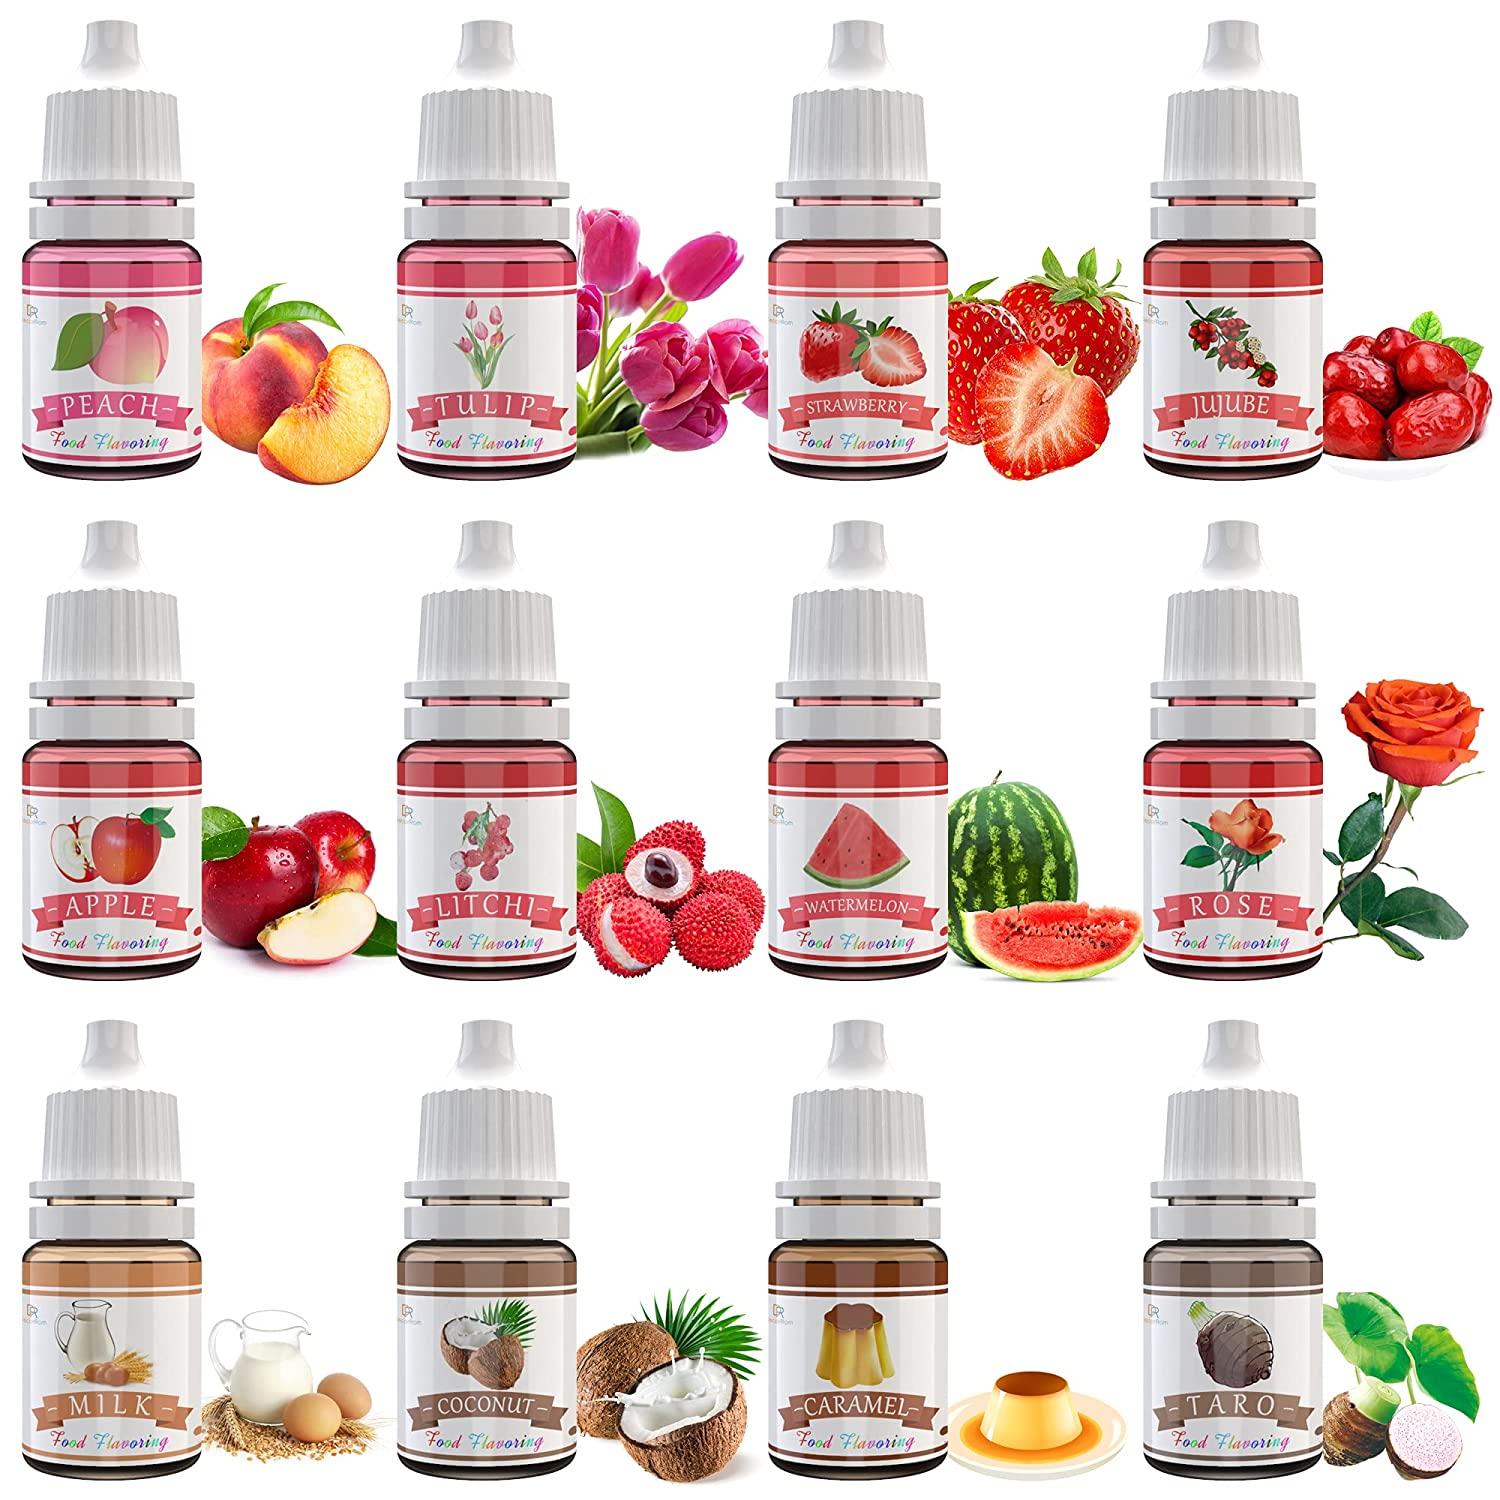 Food Flavoring Oil - 24 Pack Concentrated Flavor Oil for Baking